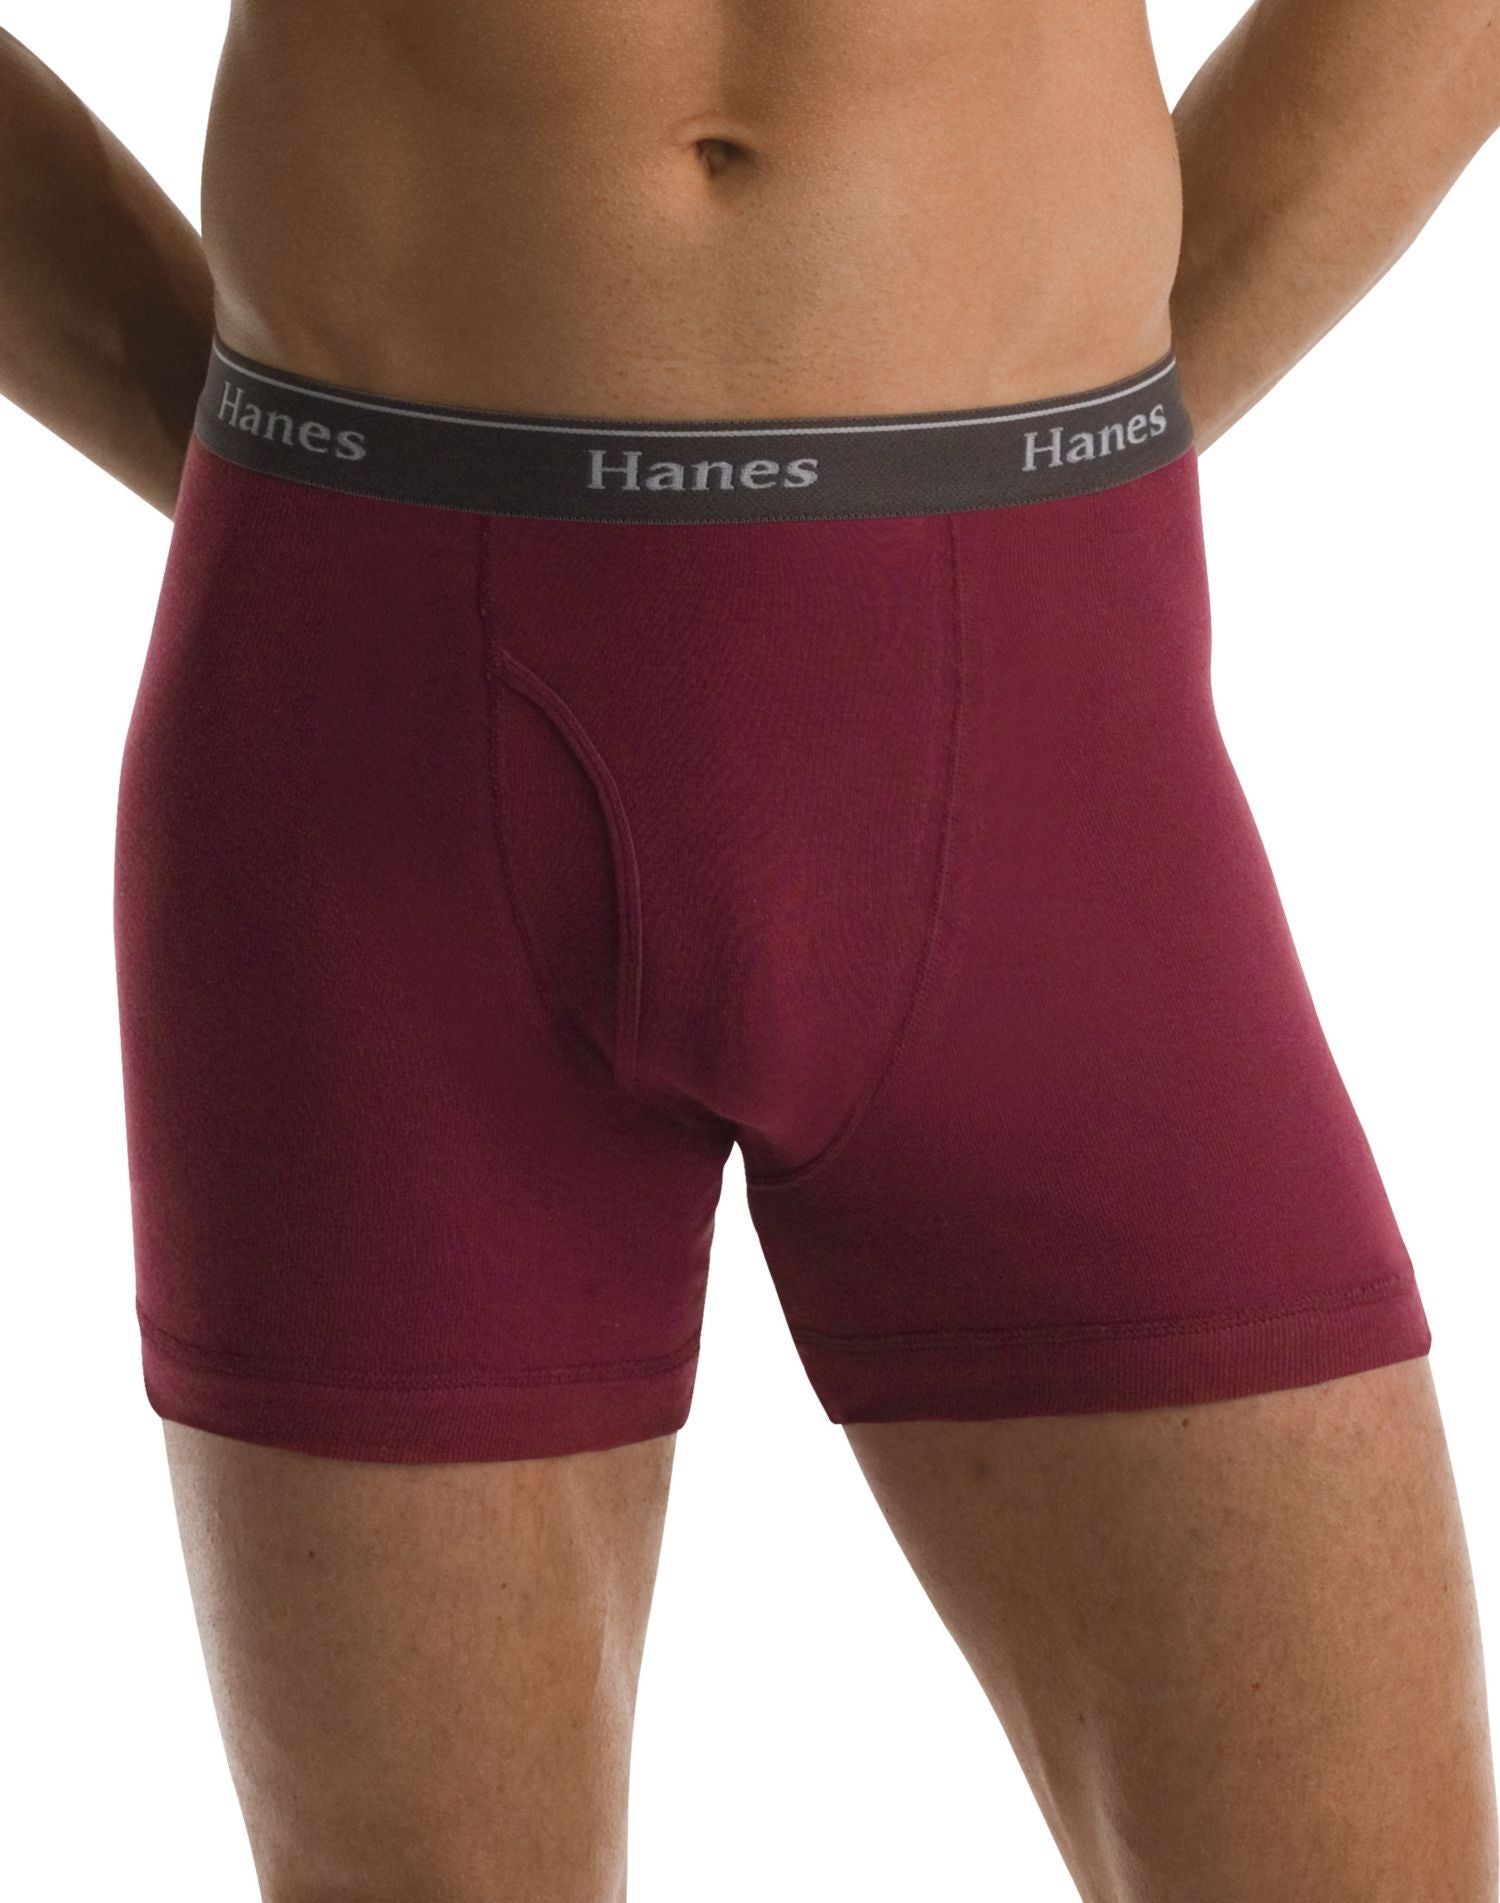 Hanes Men's 5-Pack Comfort Soft Boxer Briefs, Assorted, Small